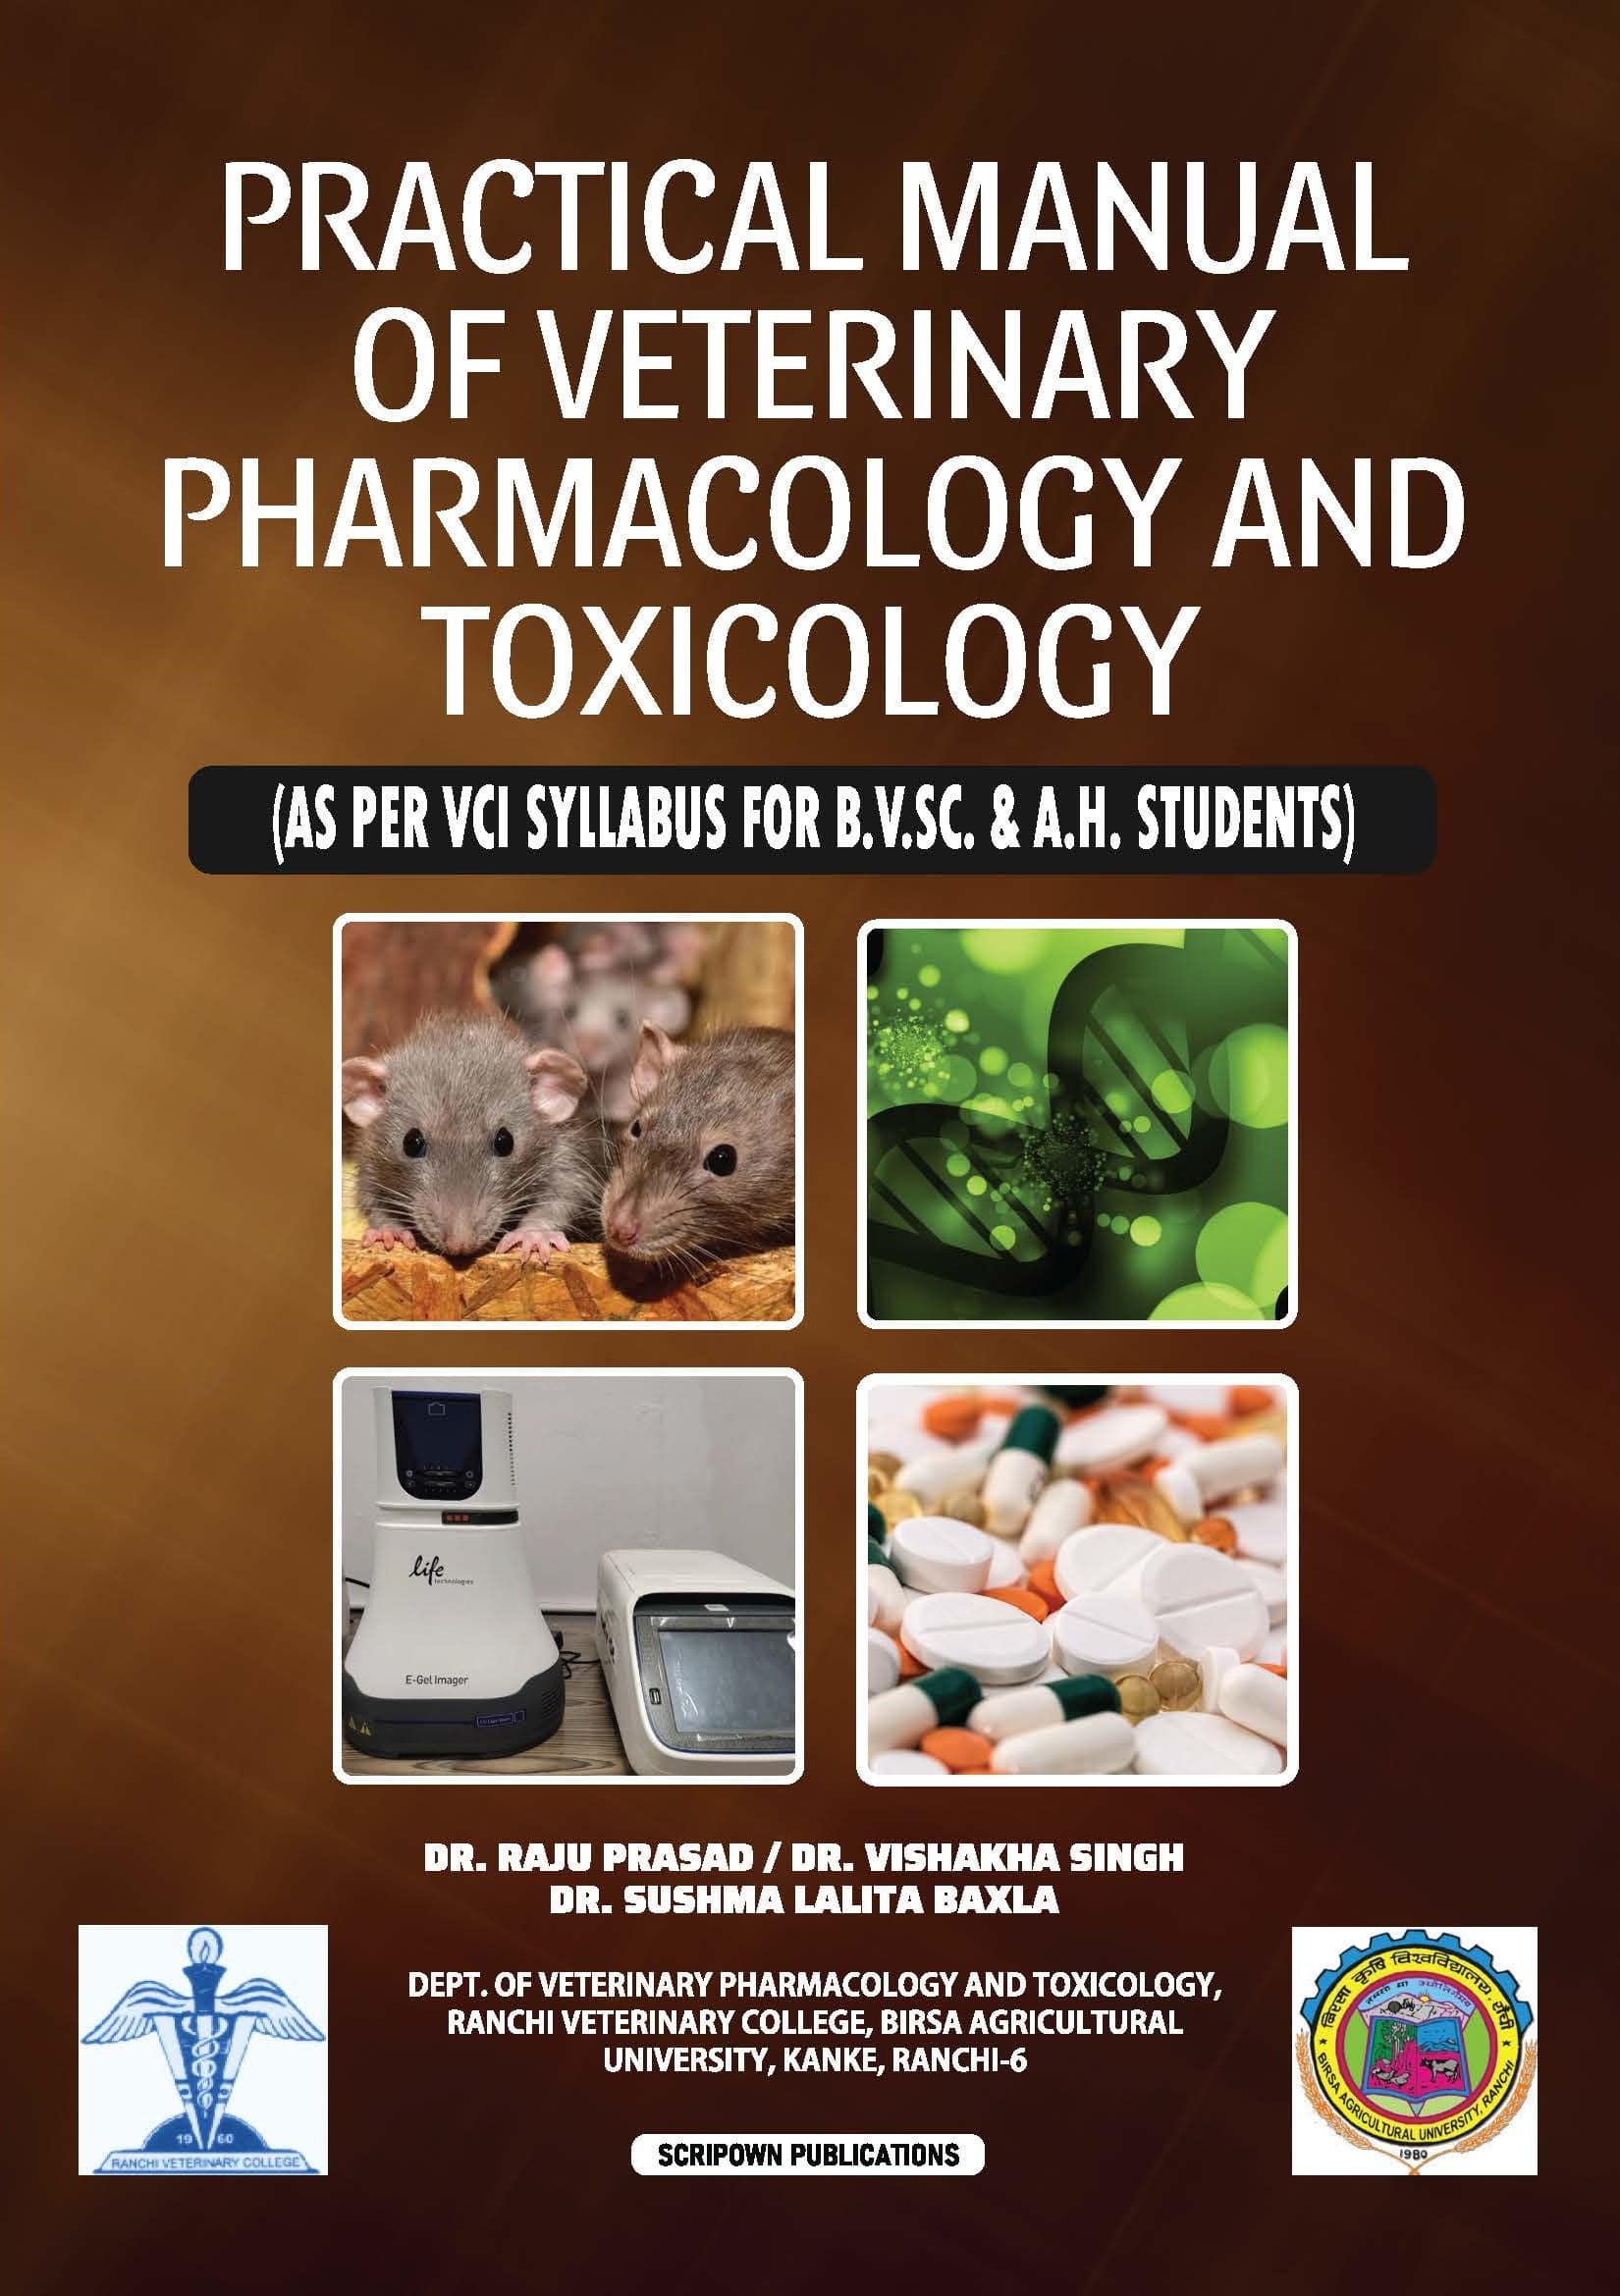 Practical Manual of Veterinary Pharmacology and Toxicology